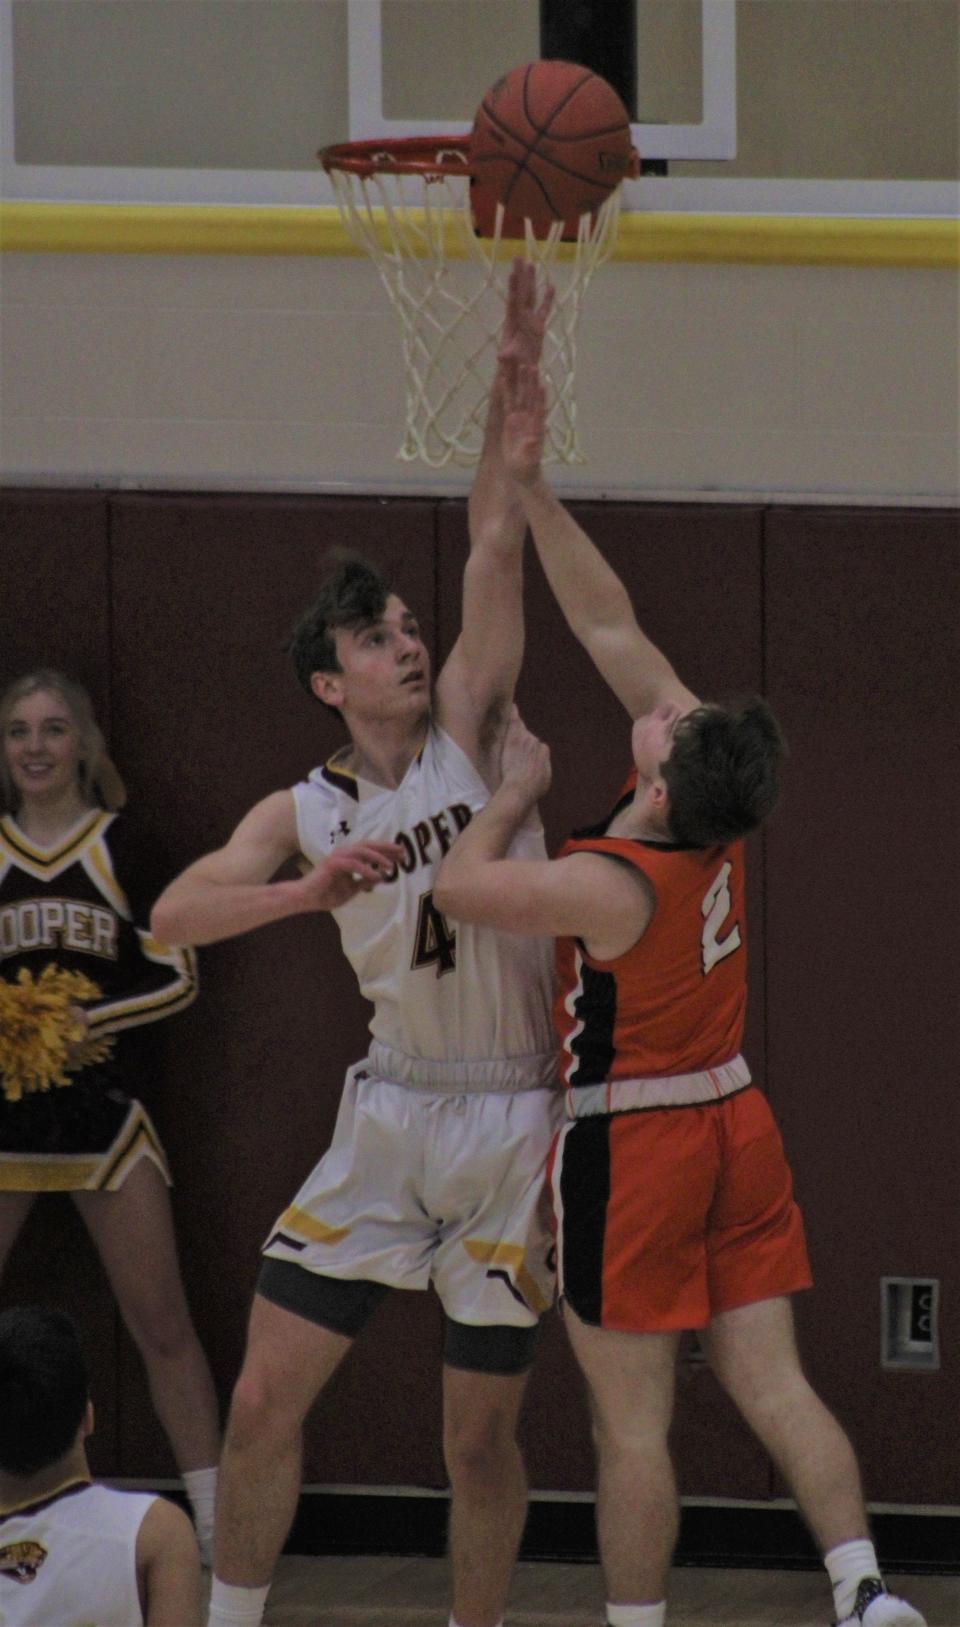 Cooper senior Blake Berry tries to block a shot from Ryle's Connor Bishop as Cooper defeated Ryle 52-45 Jan. 21.